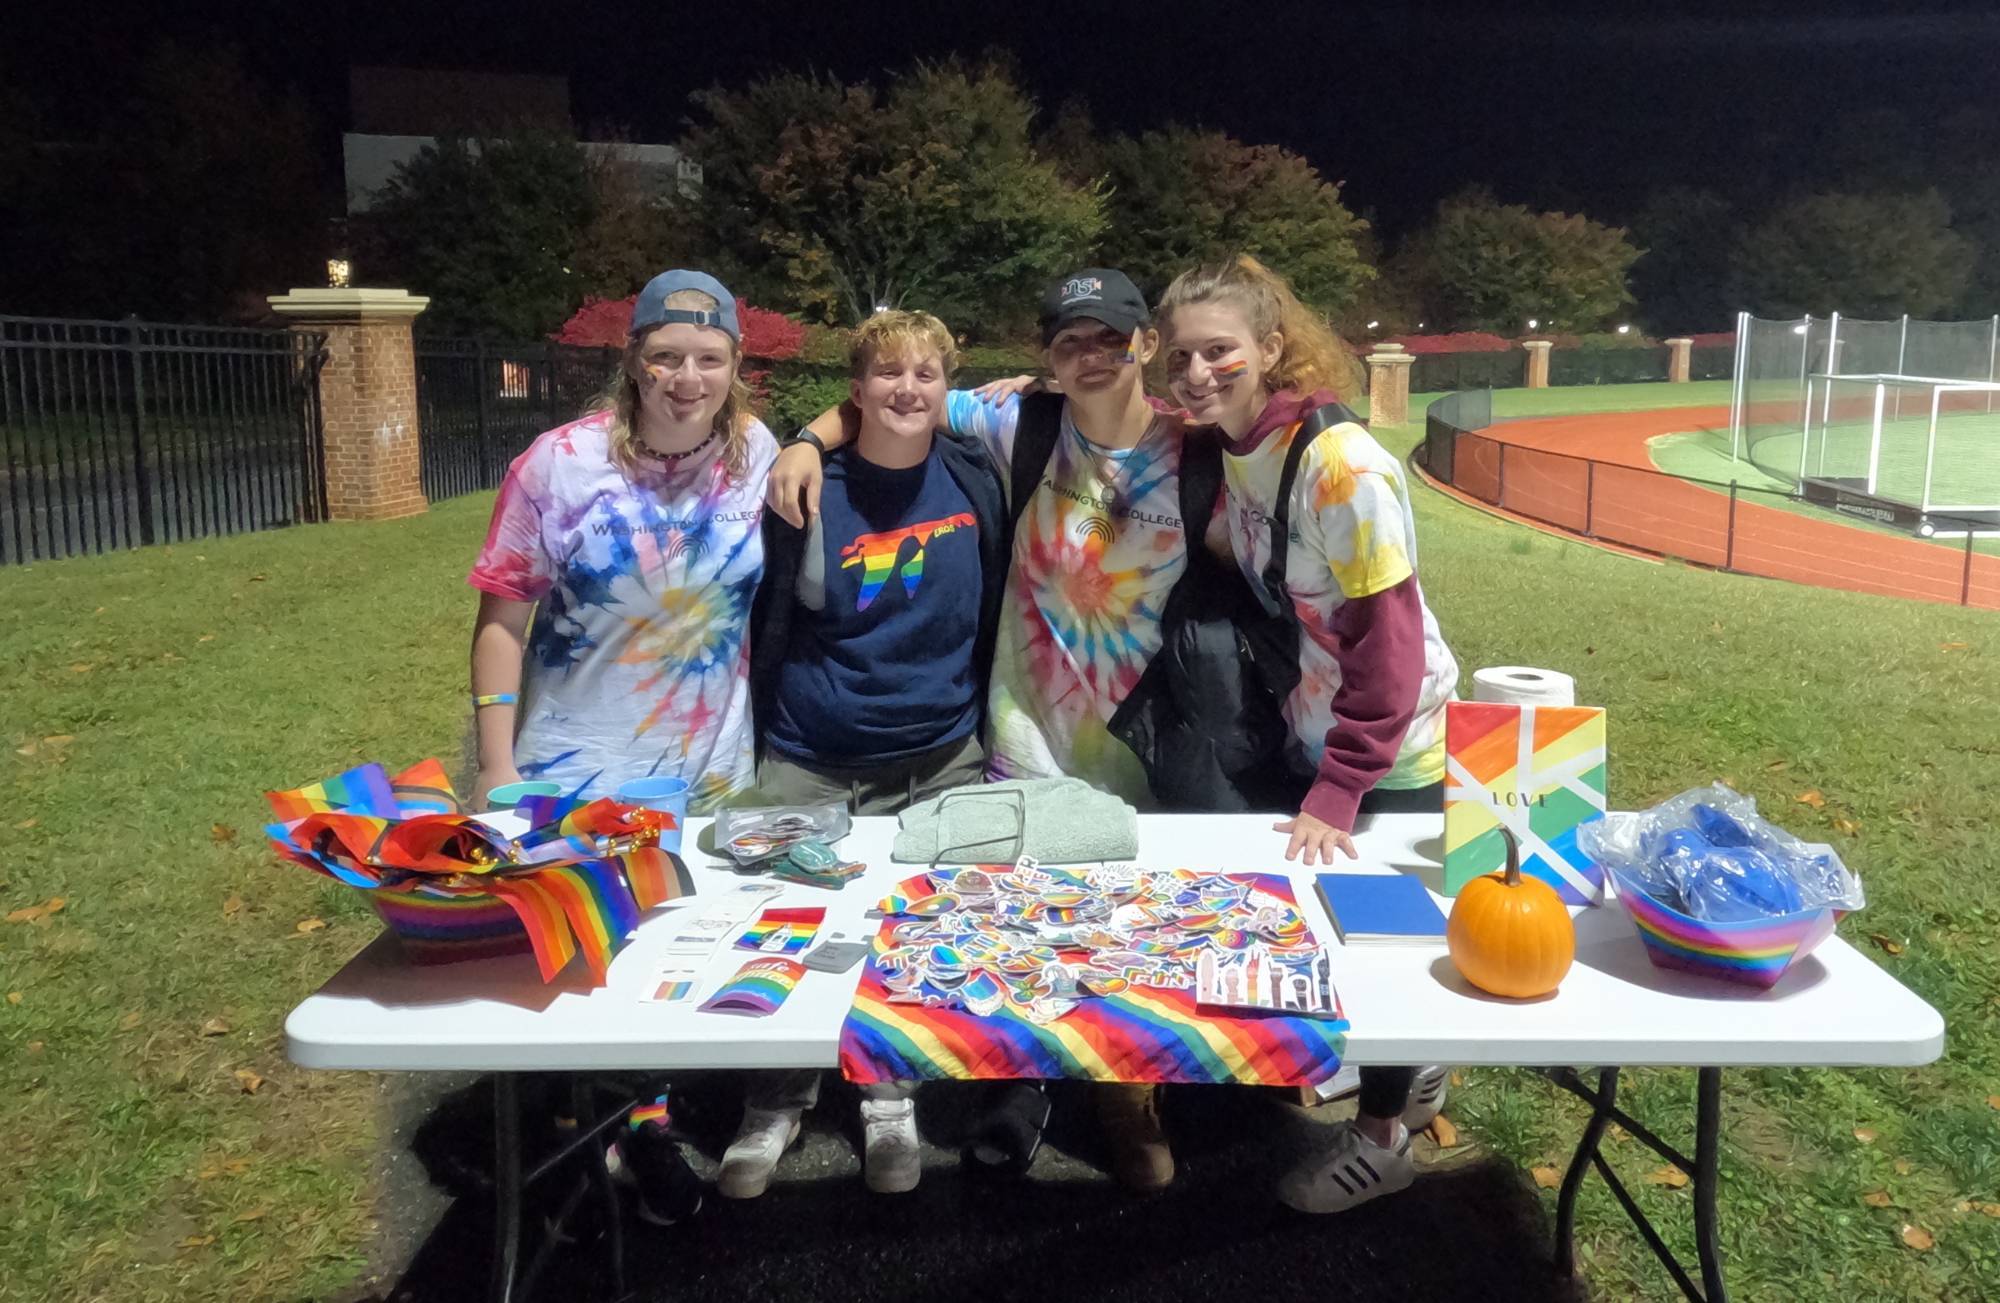 Four students offer rainbow materials to fans at a Washington College soccer game